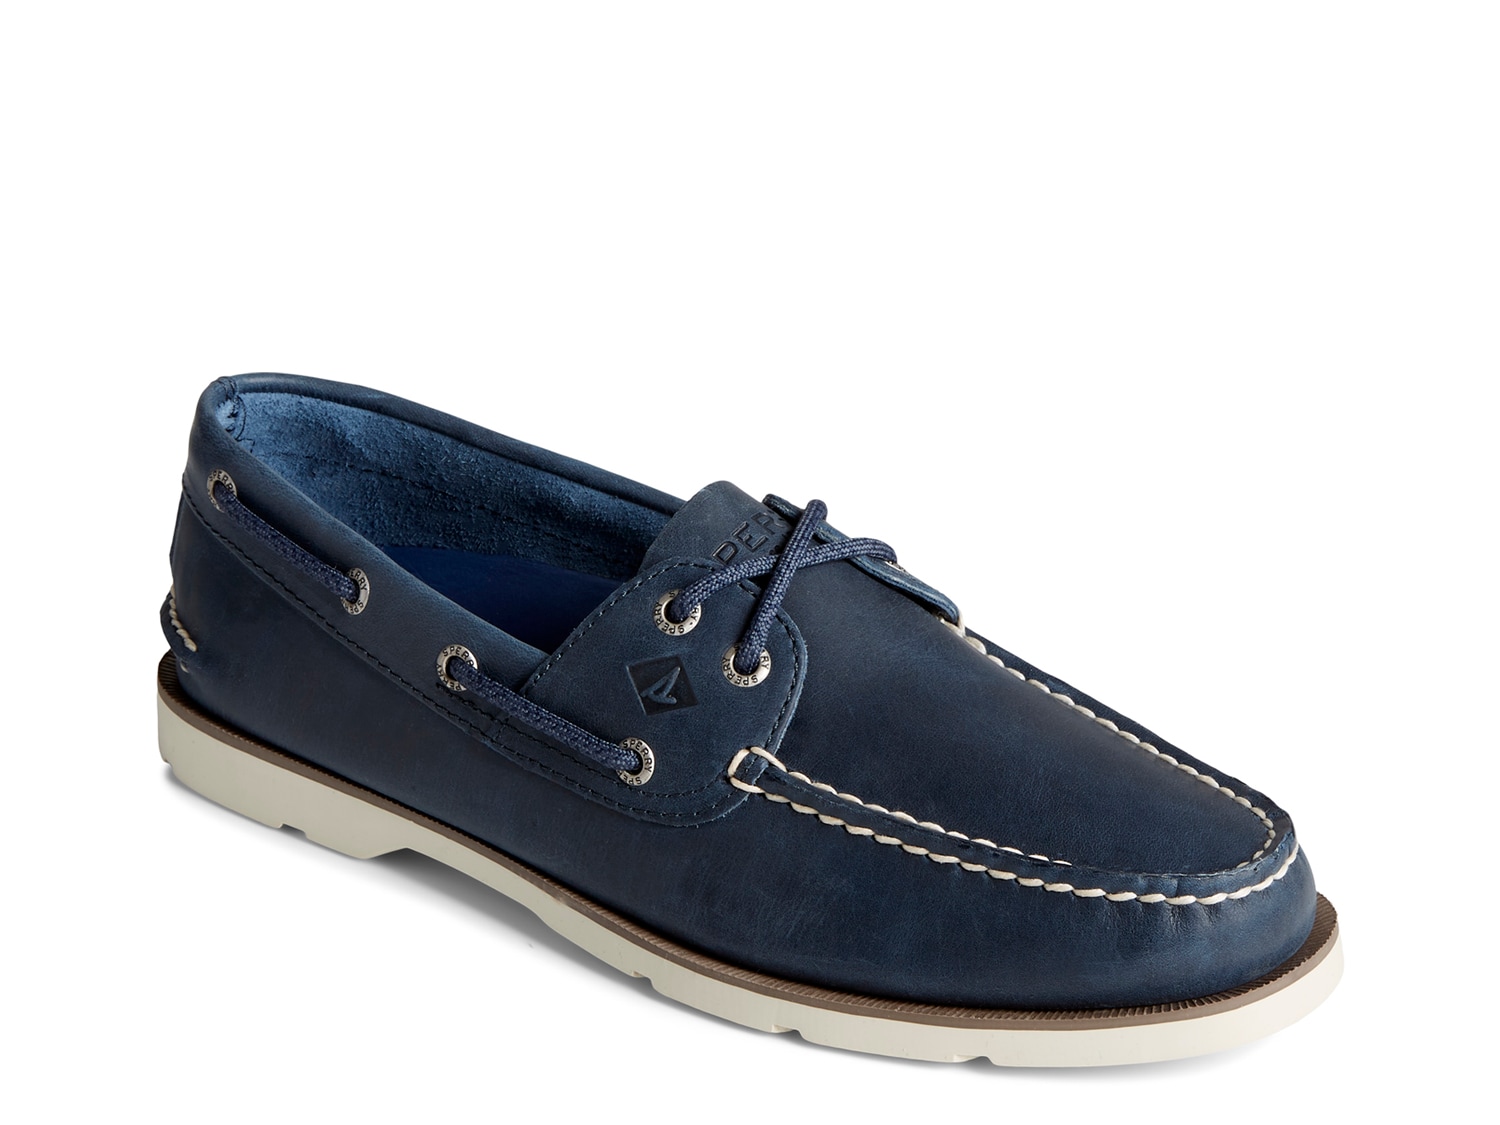 Shoe laces sperry + FREE SHIPPING